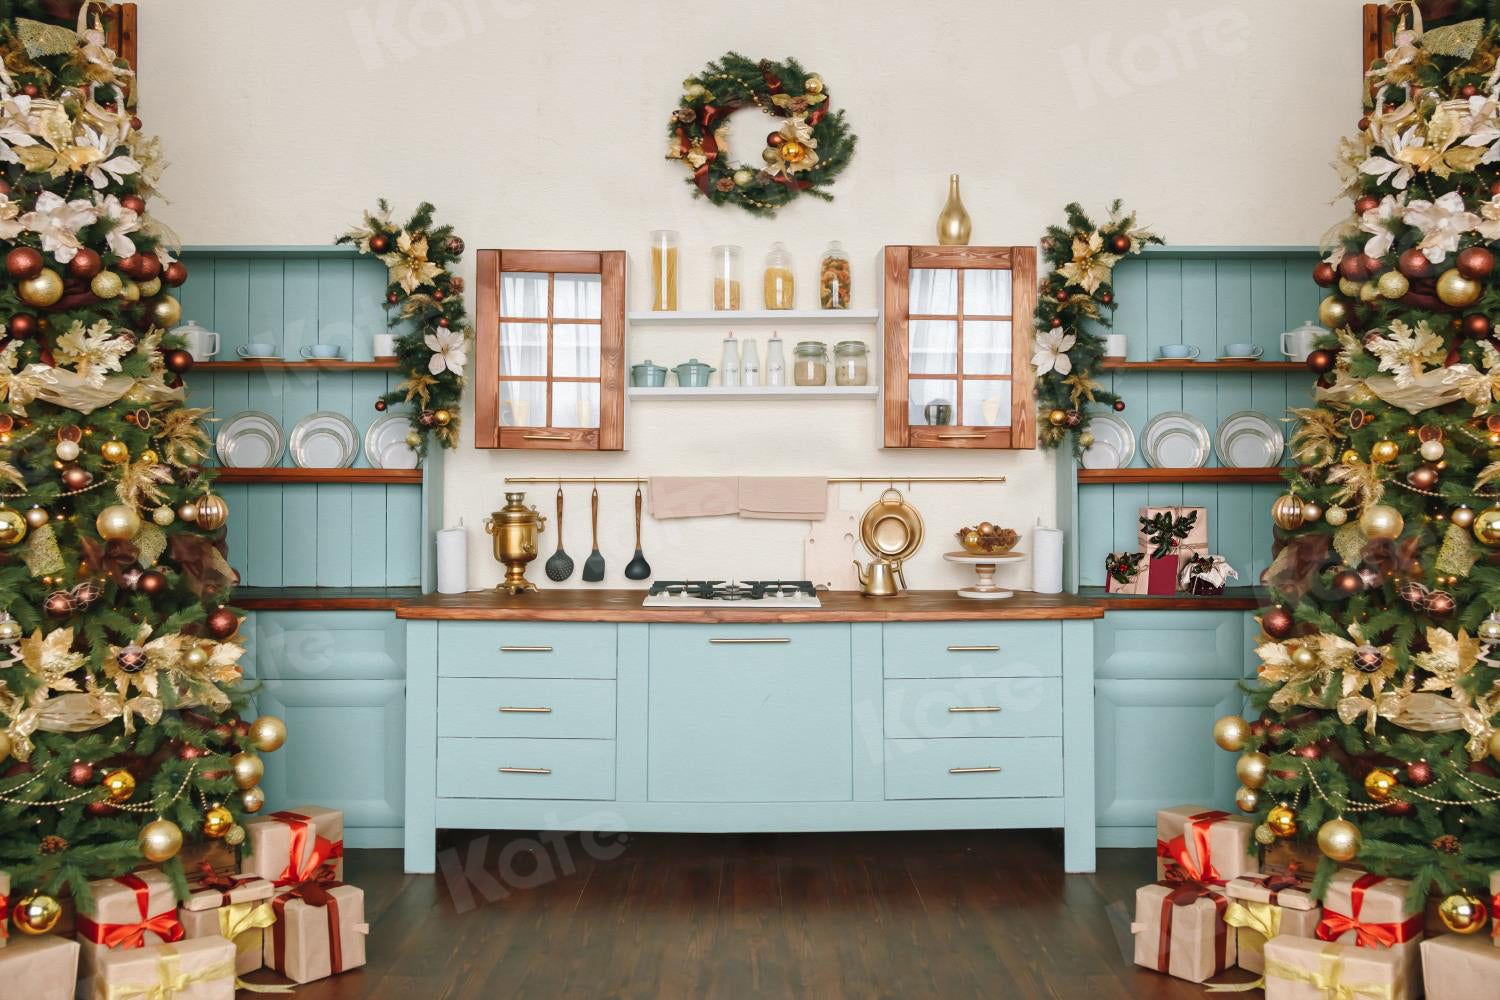 Kate Christmas Kitchen Closet Backdrop Blue for Photography